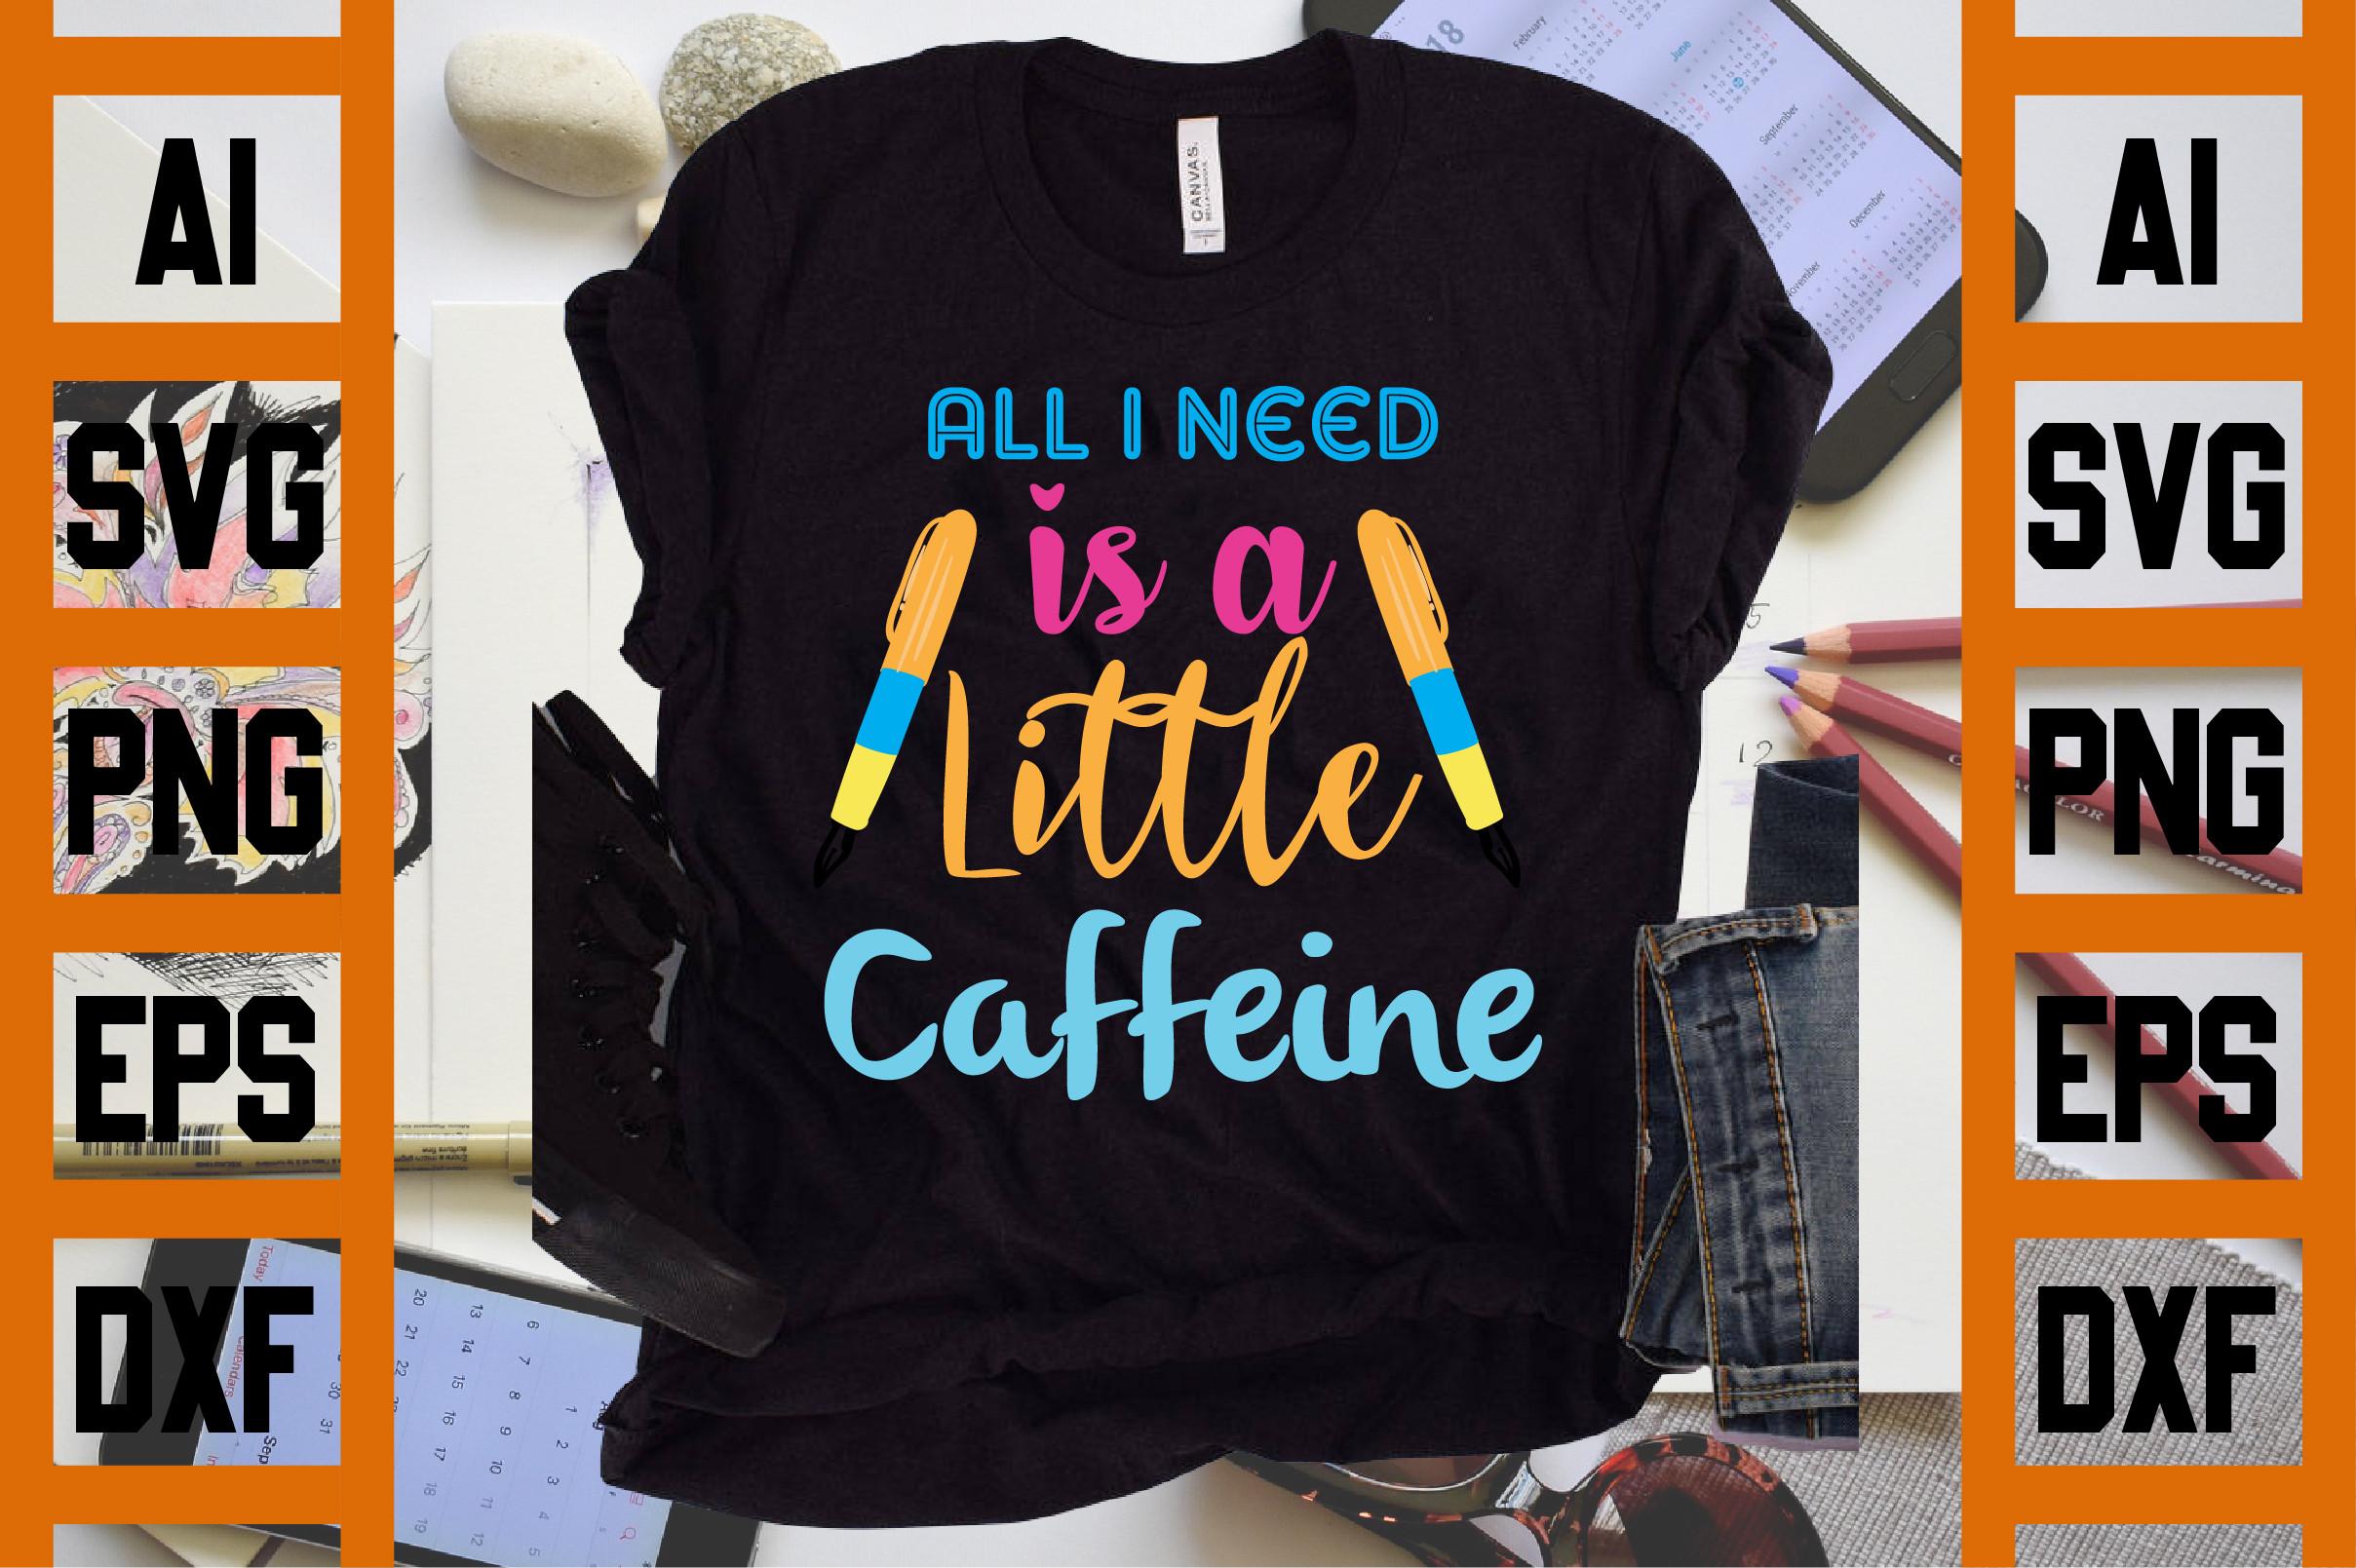 All I Need is a Little Caffeine